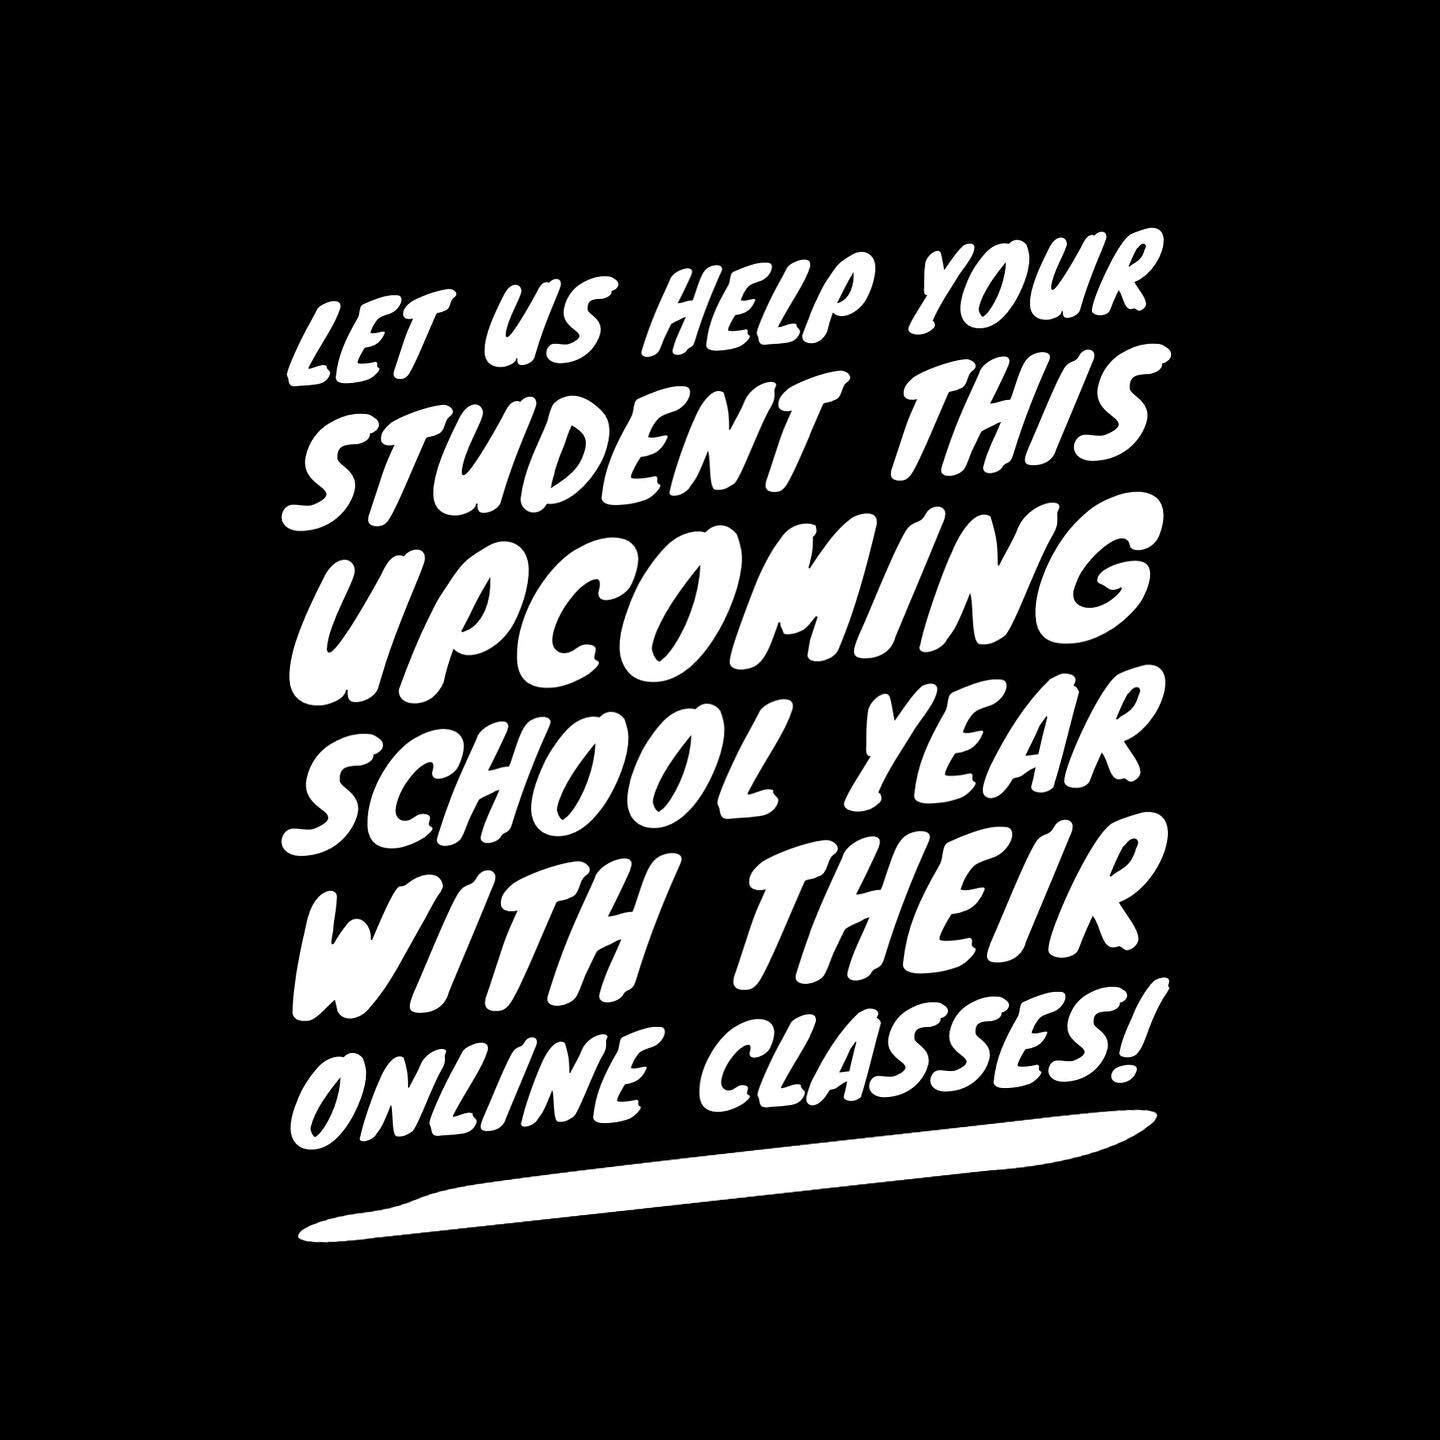 Our young students aren&rsquo;t used to online learning so we want to make it easier for them and help with their courses and homework. Let&rsquo;s work together to make sure your student succeeds!